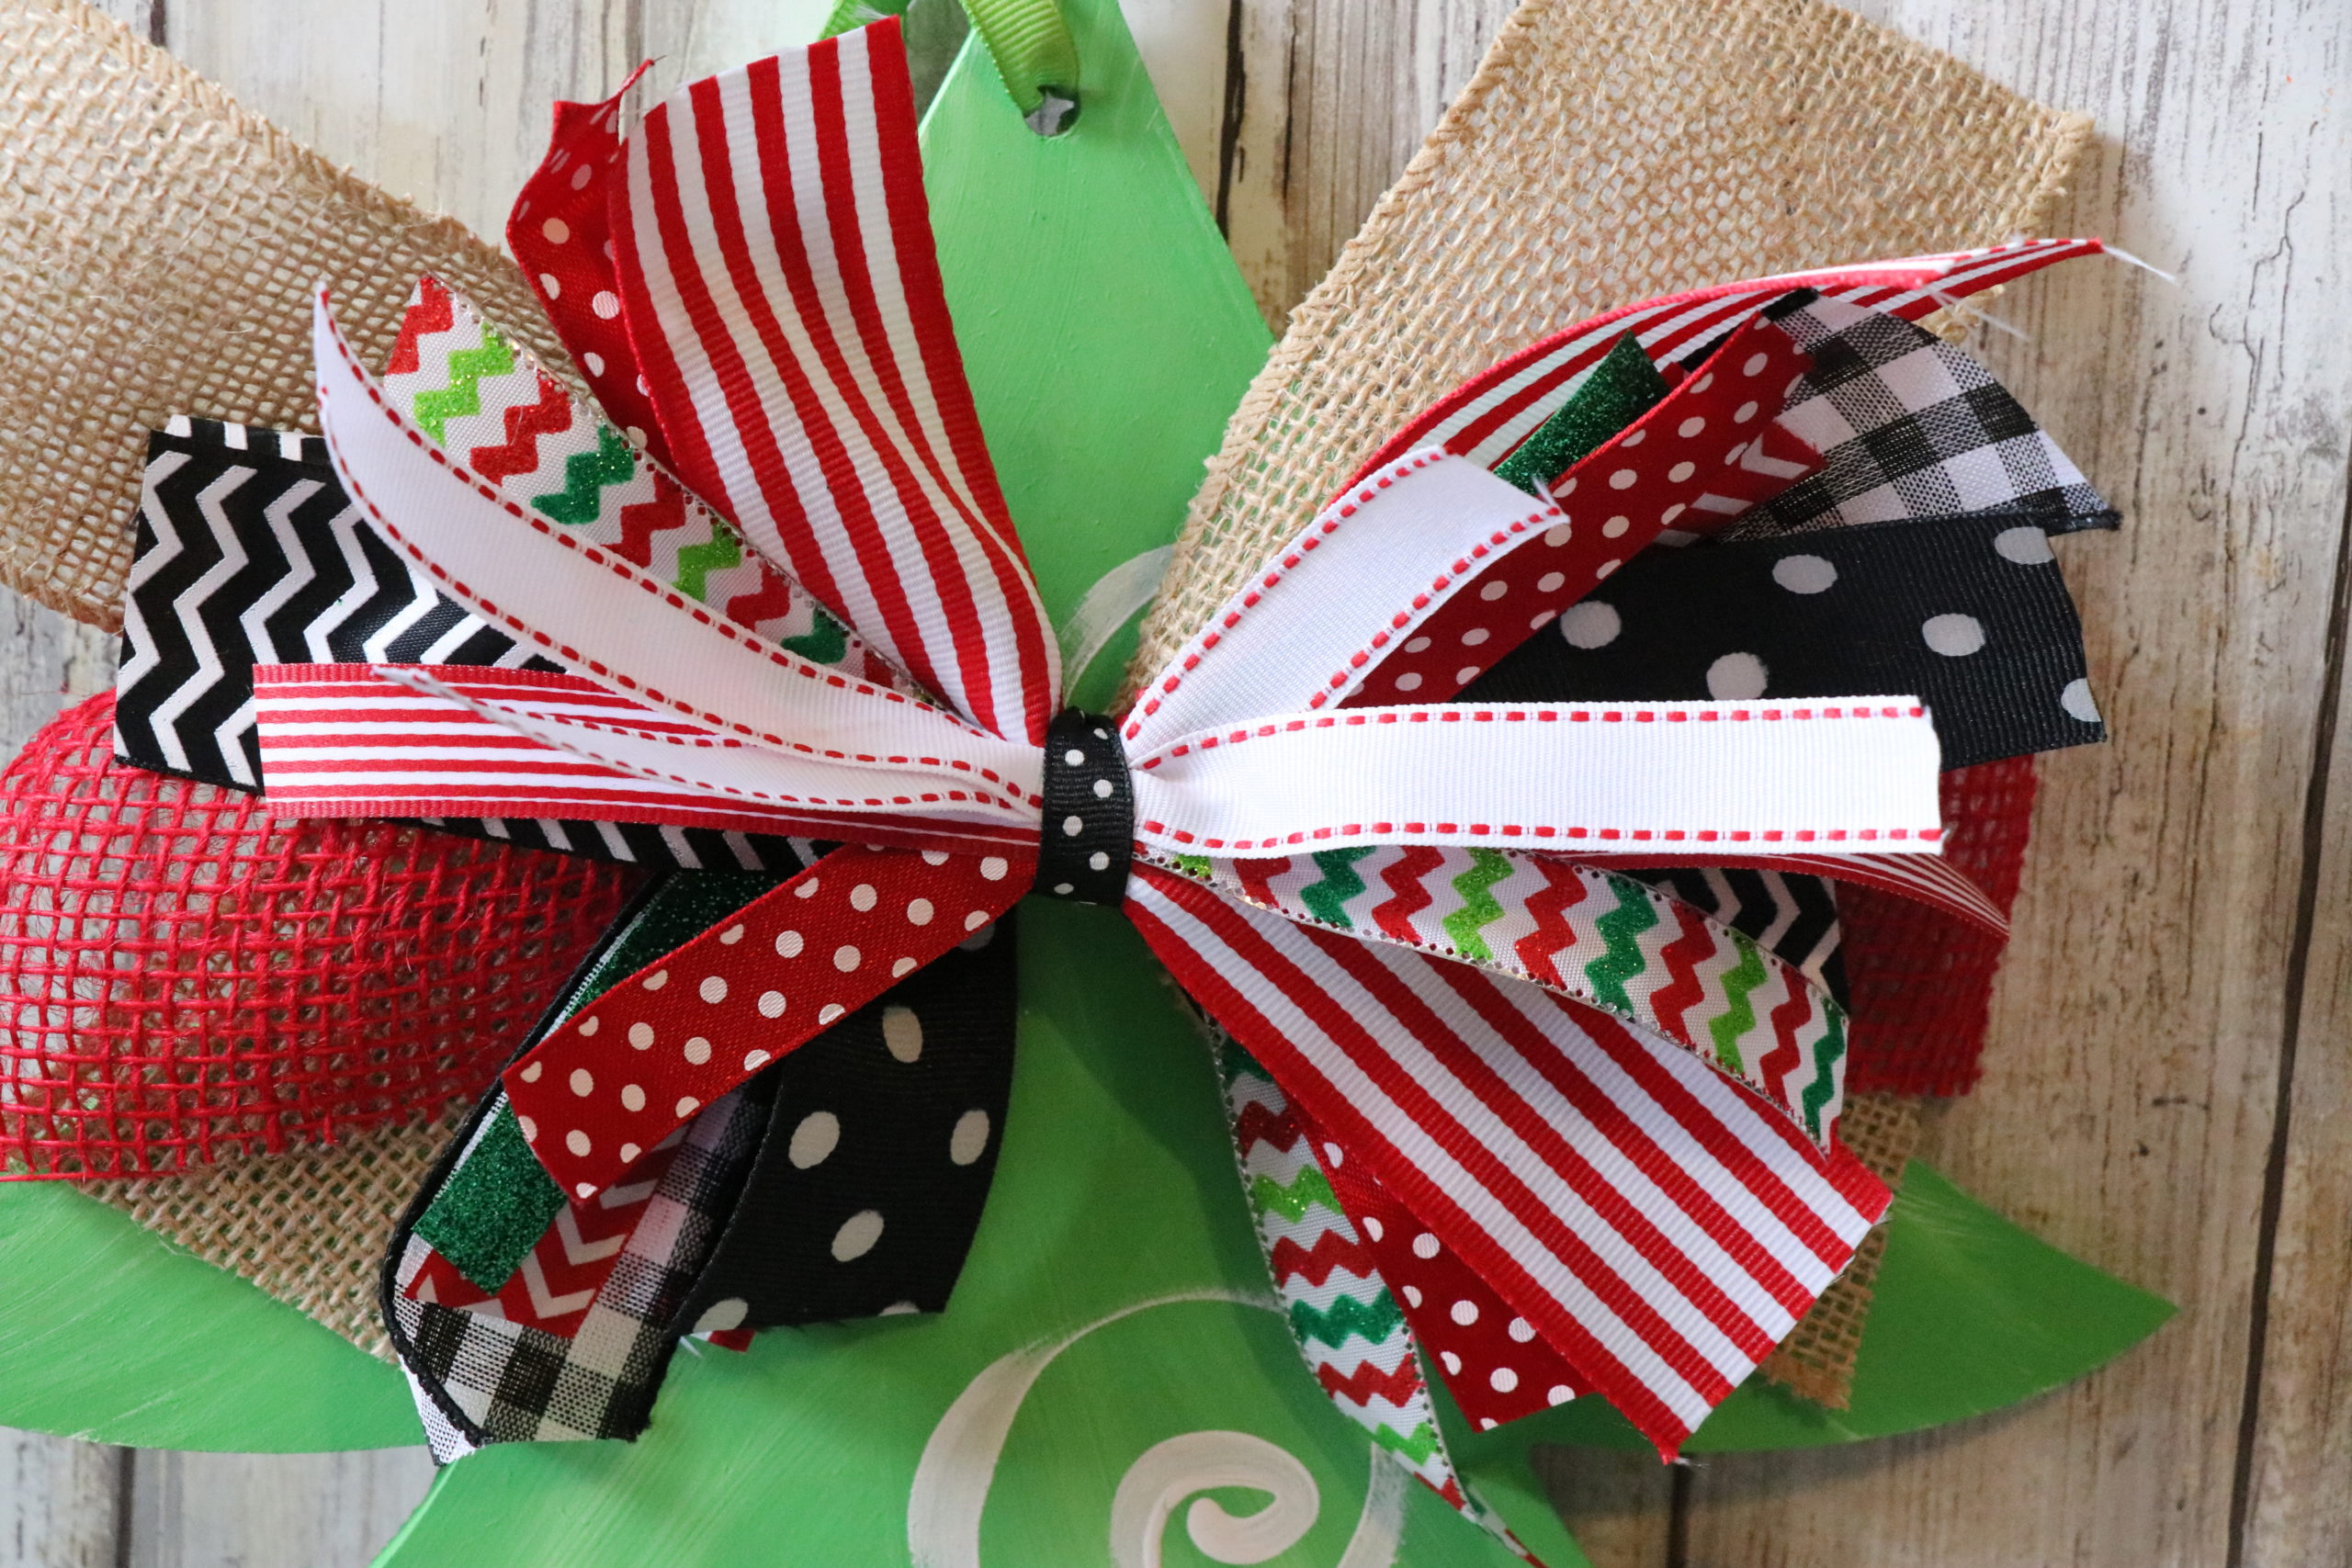 How To Tie A Bow With Ribbon Step By Step